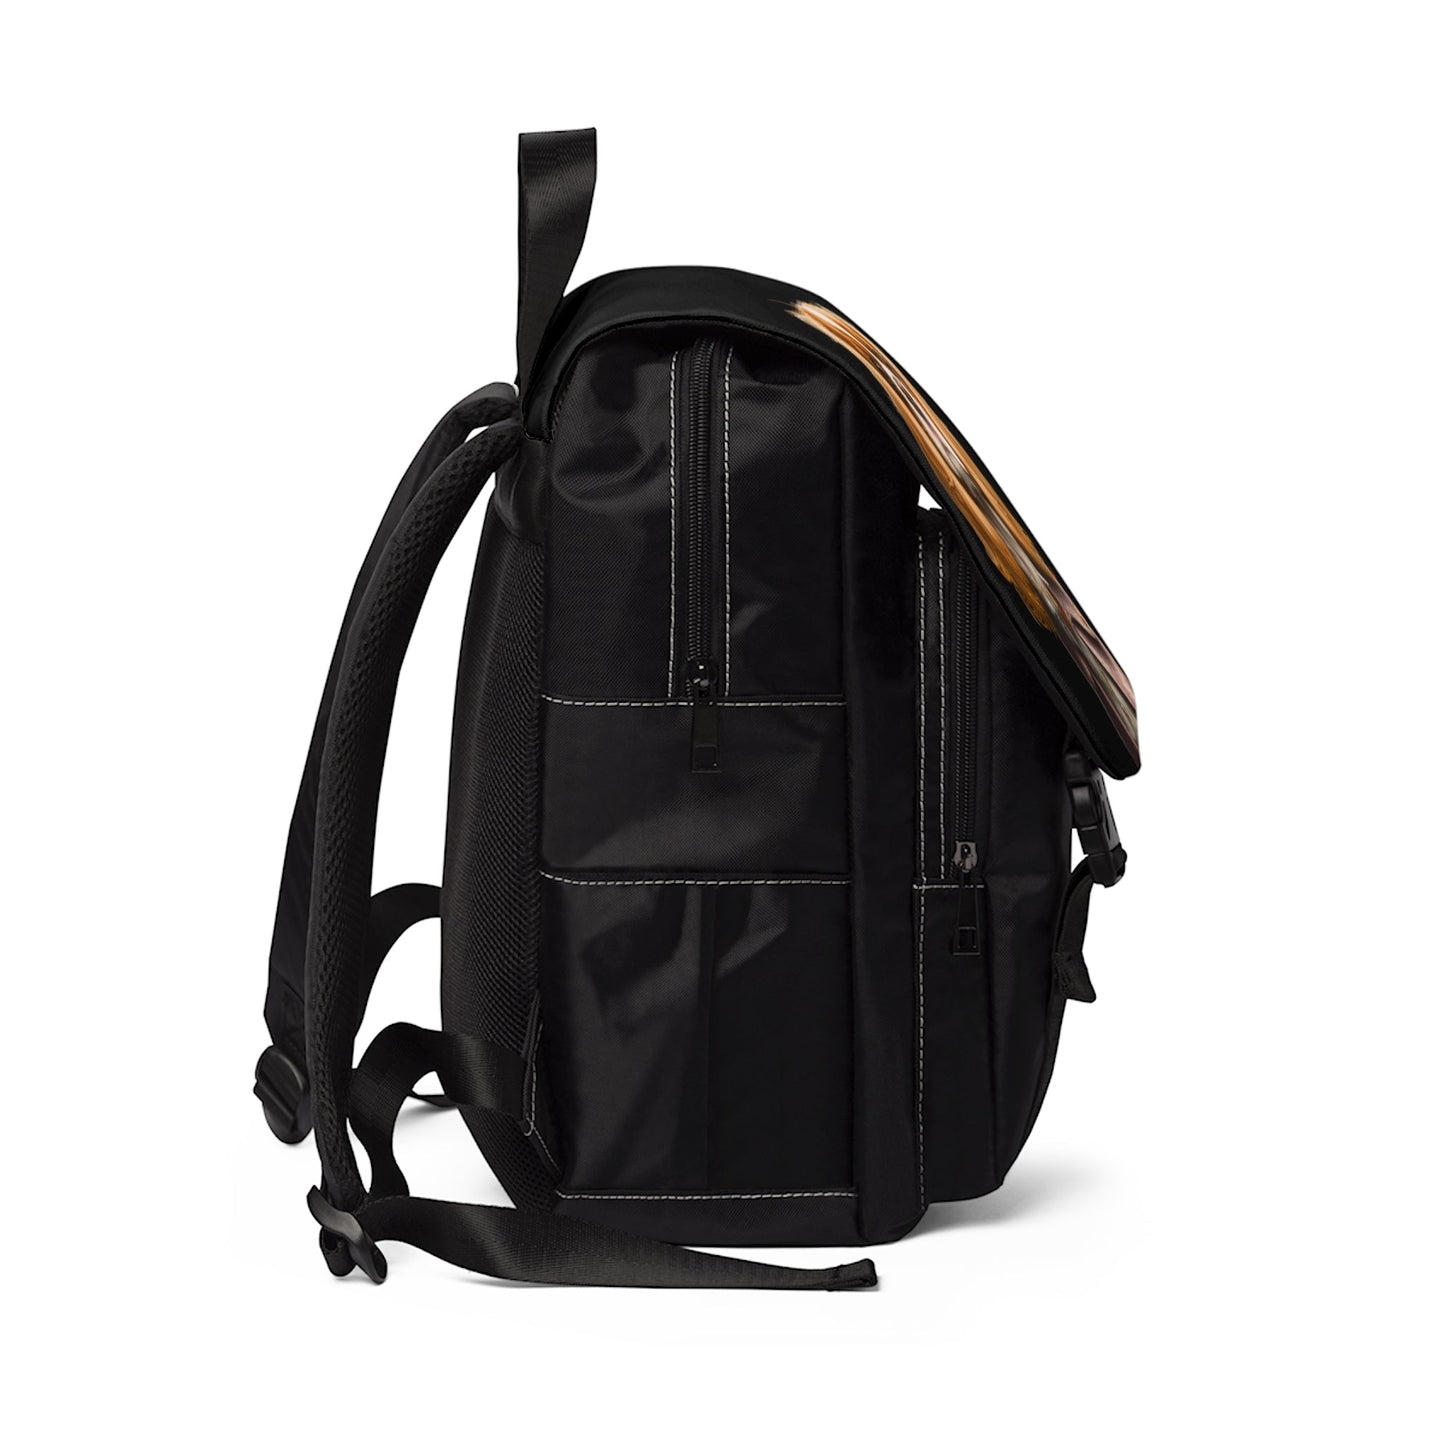 Unisex Casual Shoulder Backpack - Shaggy Chic